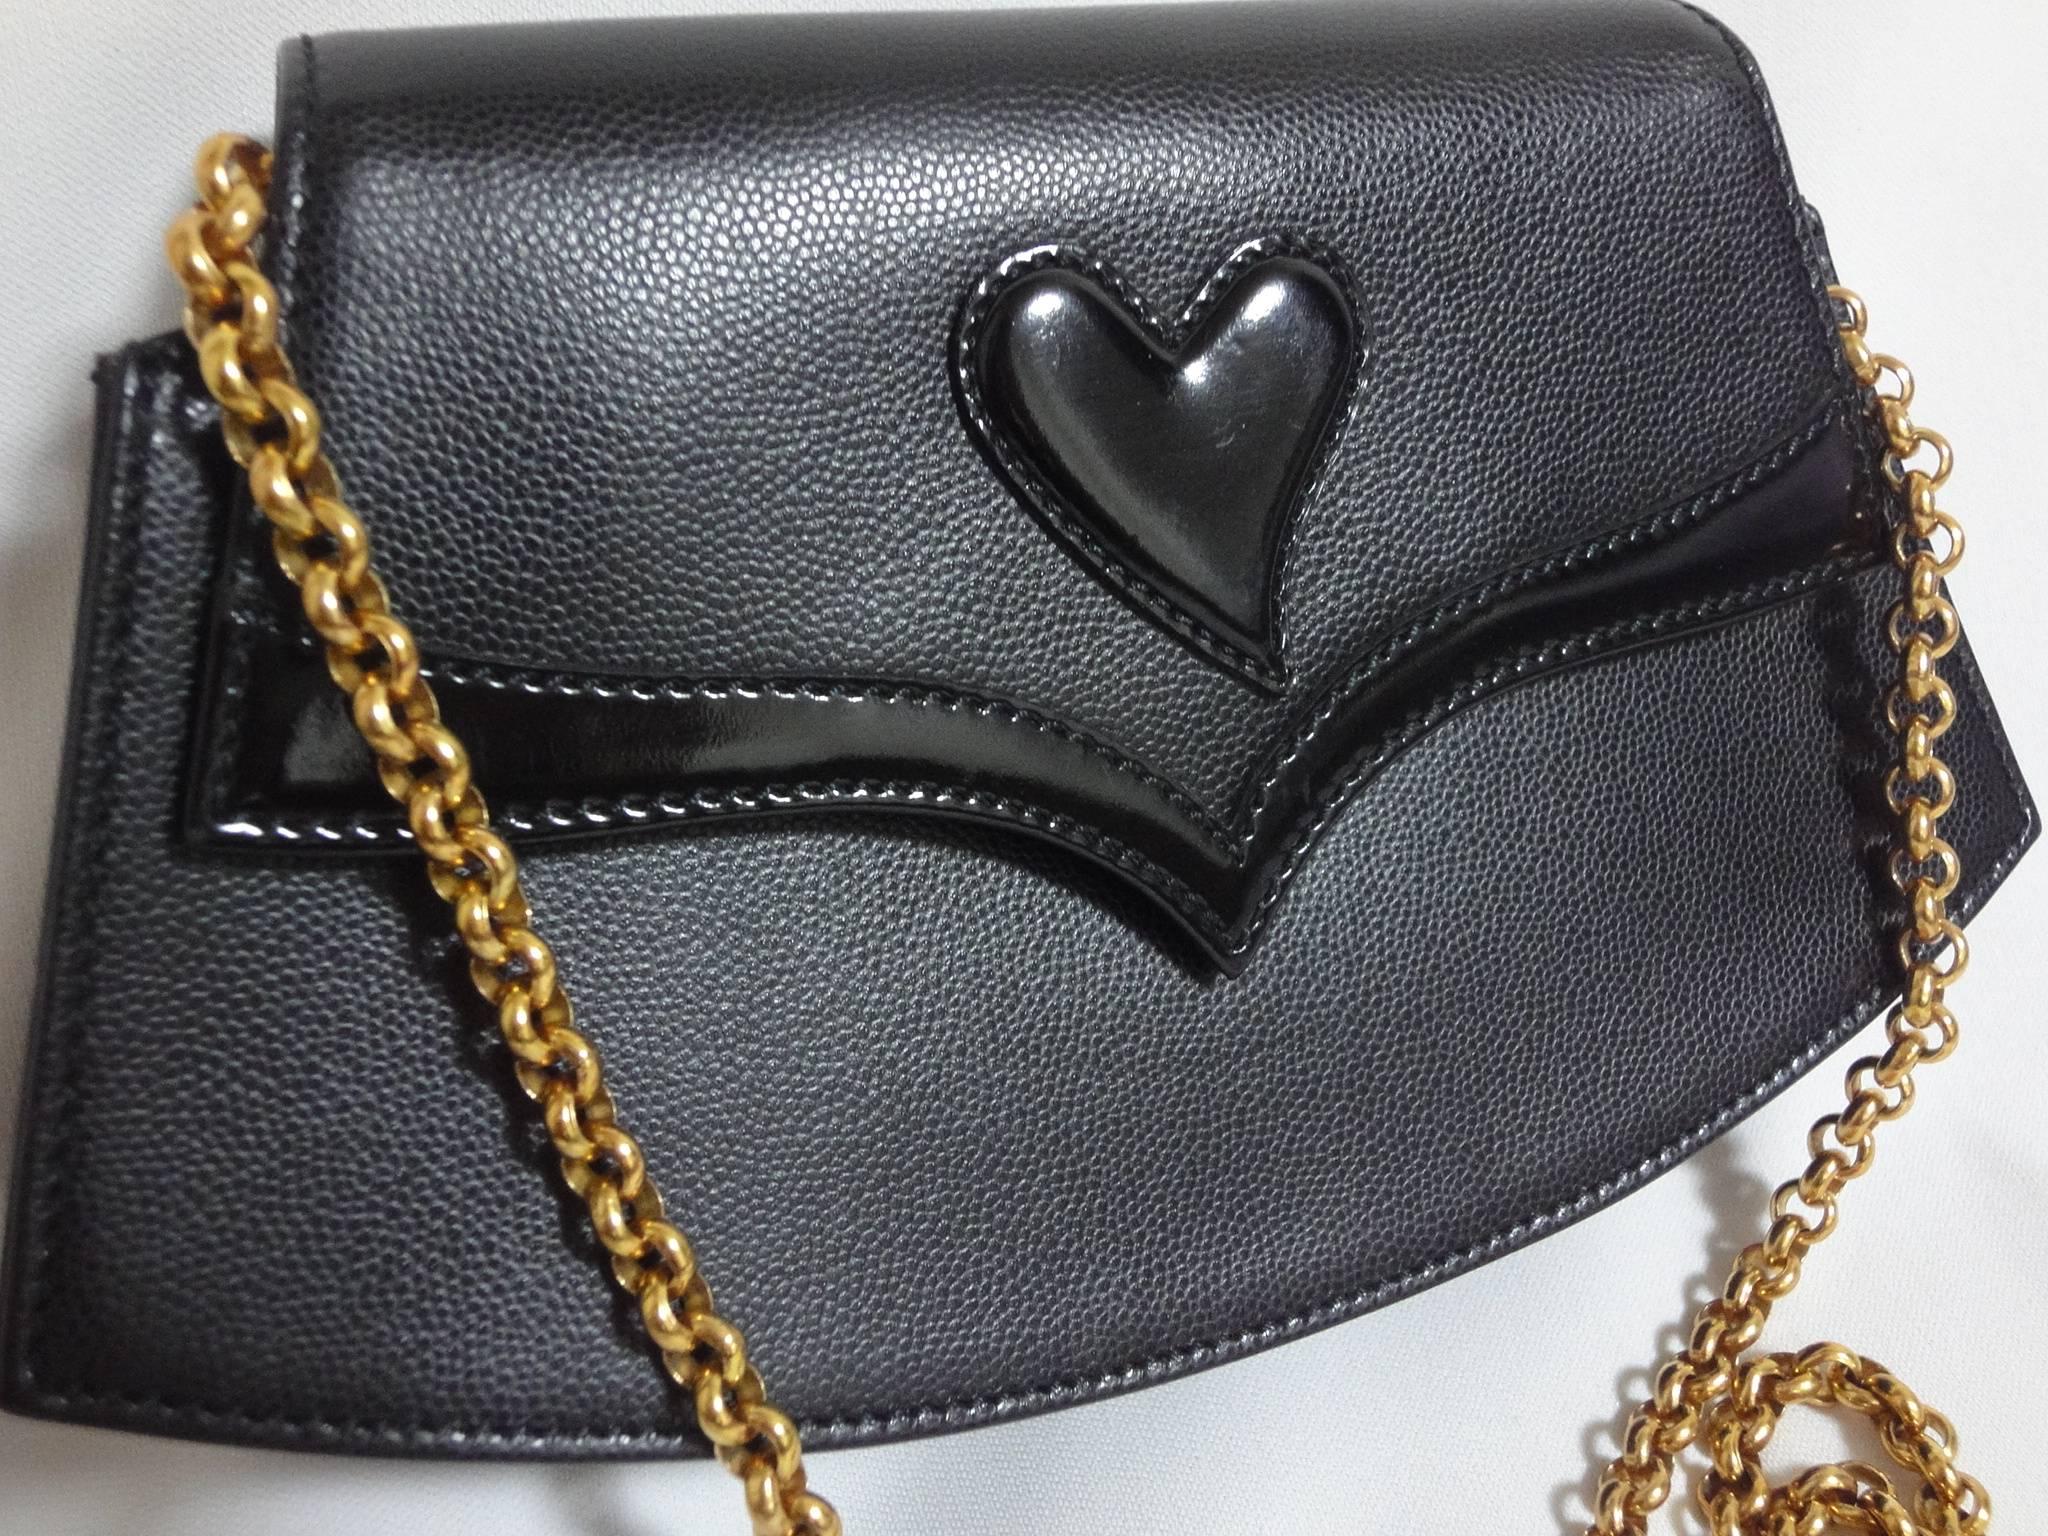 MINT. Vintage Christian Lacroix black leather pointy flap tip and heart motif, party clutch purse with golden chain strap. Hot masterpiece

This is a Christian Lacroix black party purse with a heart motif and golden chain strap. 
Cute trapezoid